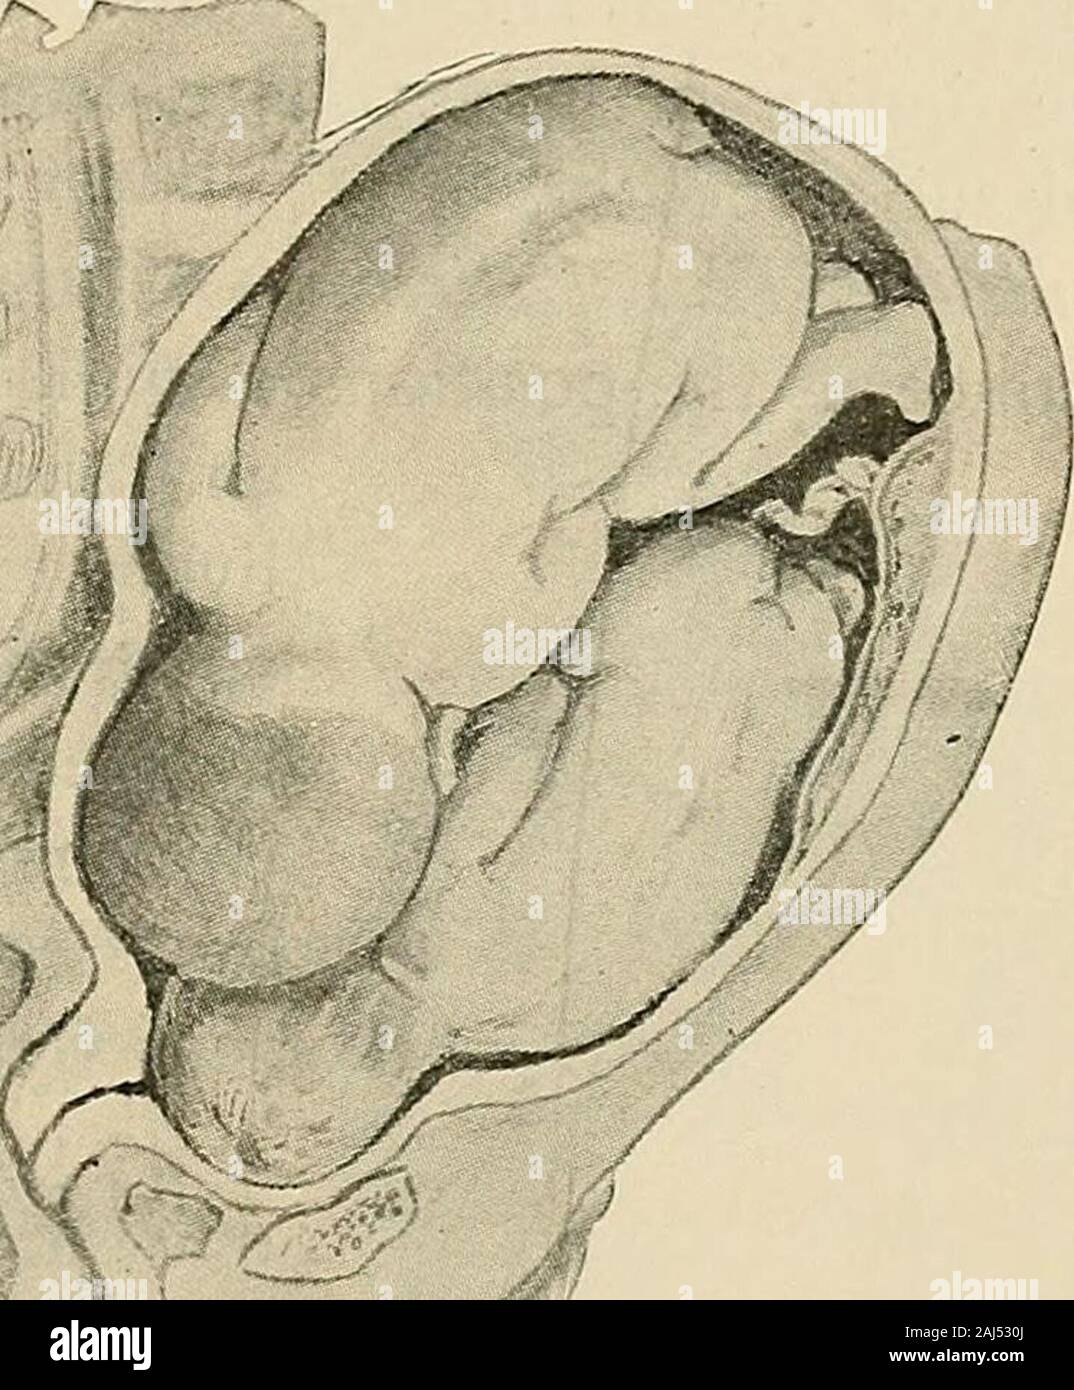 A manual of obstetrics . strosities according to thedegree of interference with the process. (3) An increasedtC7idcucy to diseases of the niendnanes. Hydramnios is a notinfrequent complication of multiple pregnancy resultingfrom some interference with the circulation of the parts.(4) Ufa/positions and nia/presentations. Transverse presen-tation of the fetus is quite a common complication of twingestations: it occurs once in about 22 cases; presentationof the breech is also frequent. PLURAL BIRTHS. 485 TJic Clinical ATanifcstatioiis of Labor in Multiple Preg-nancy.—The labor is precisely like t Stock Photo